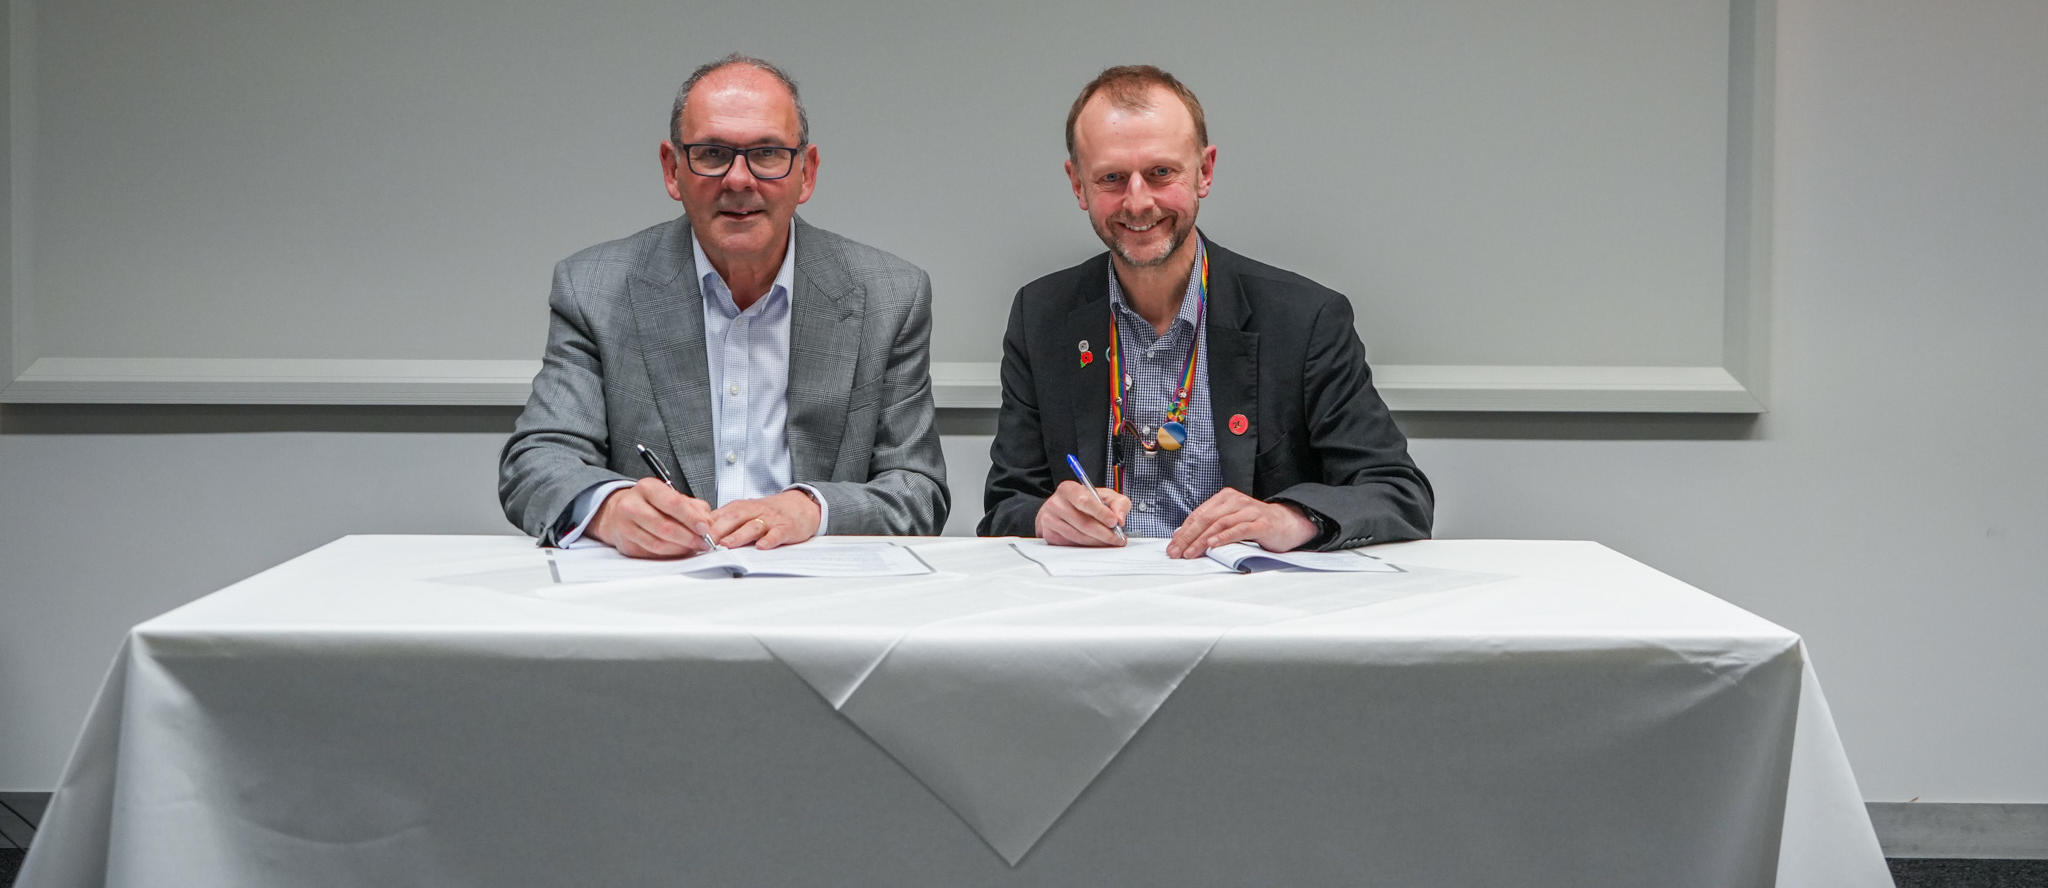 vice chancellors from hull and lincoln sign documents together